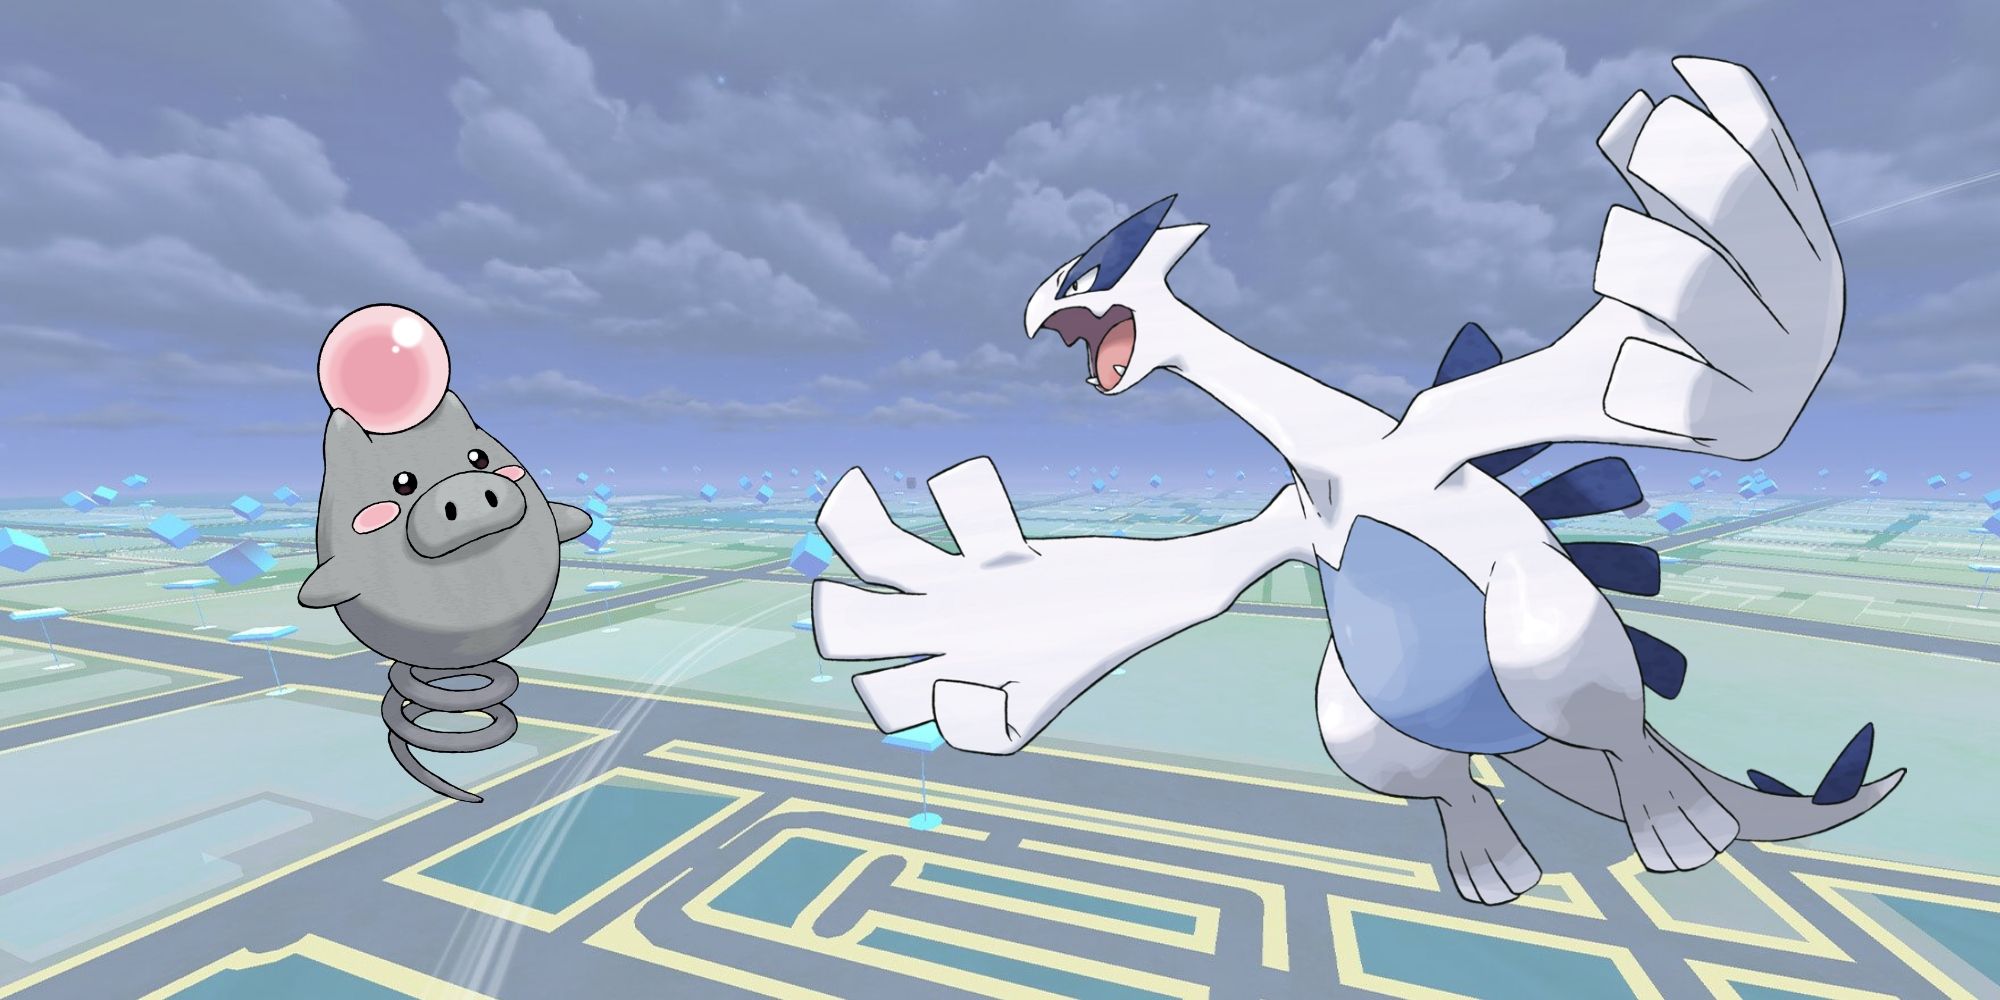 Spoink and Lugia